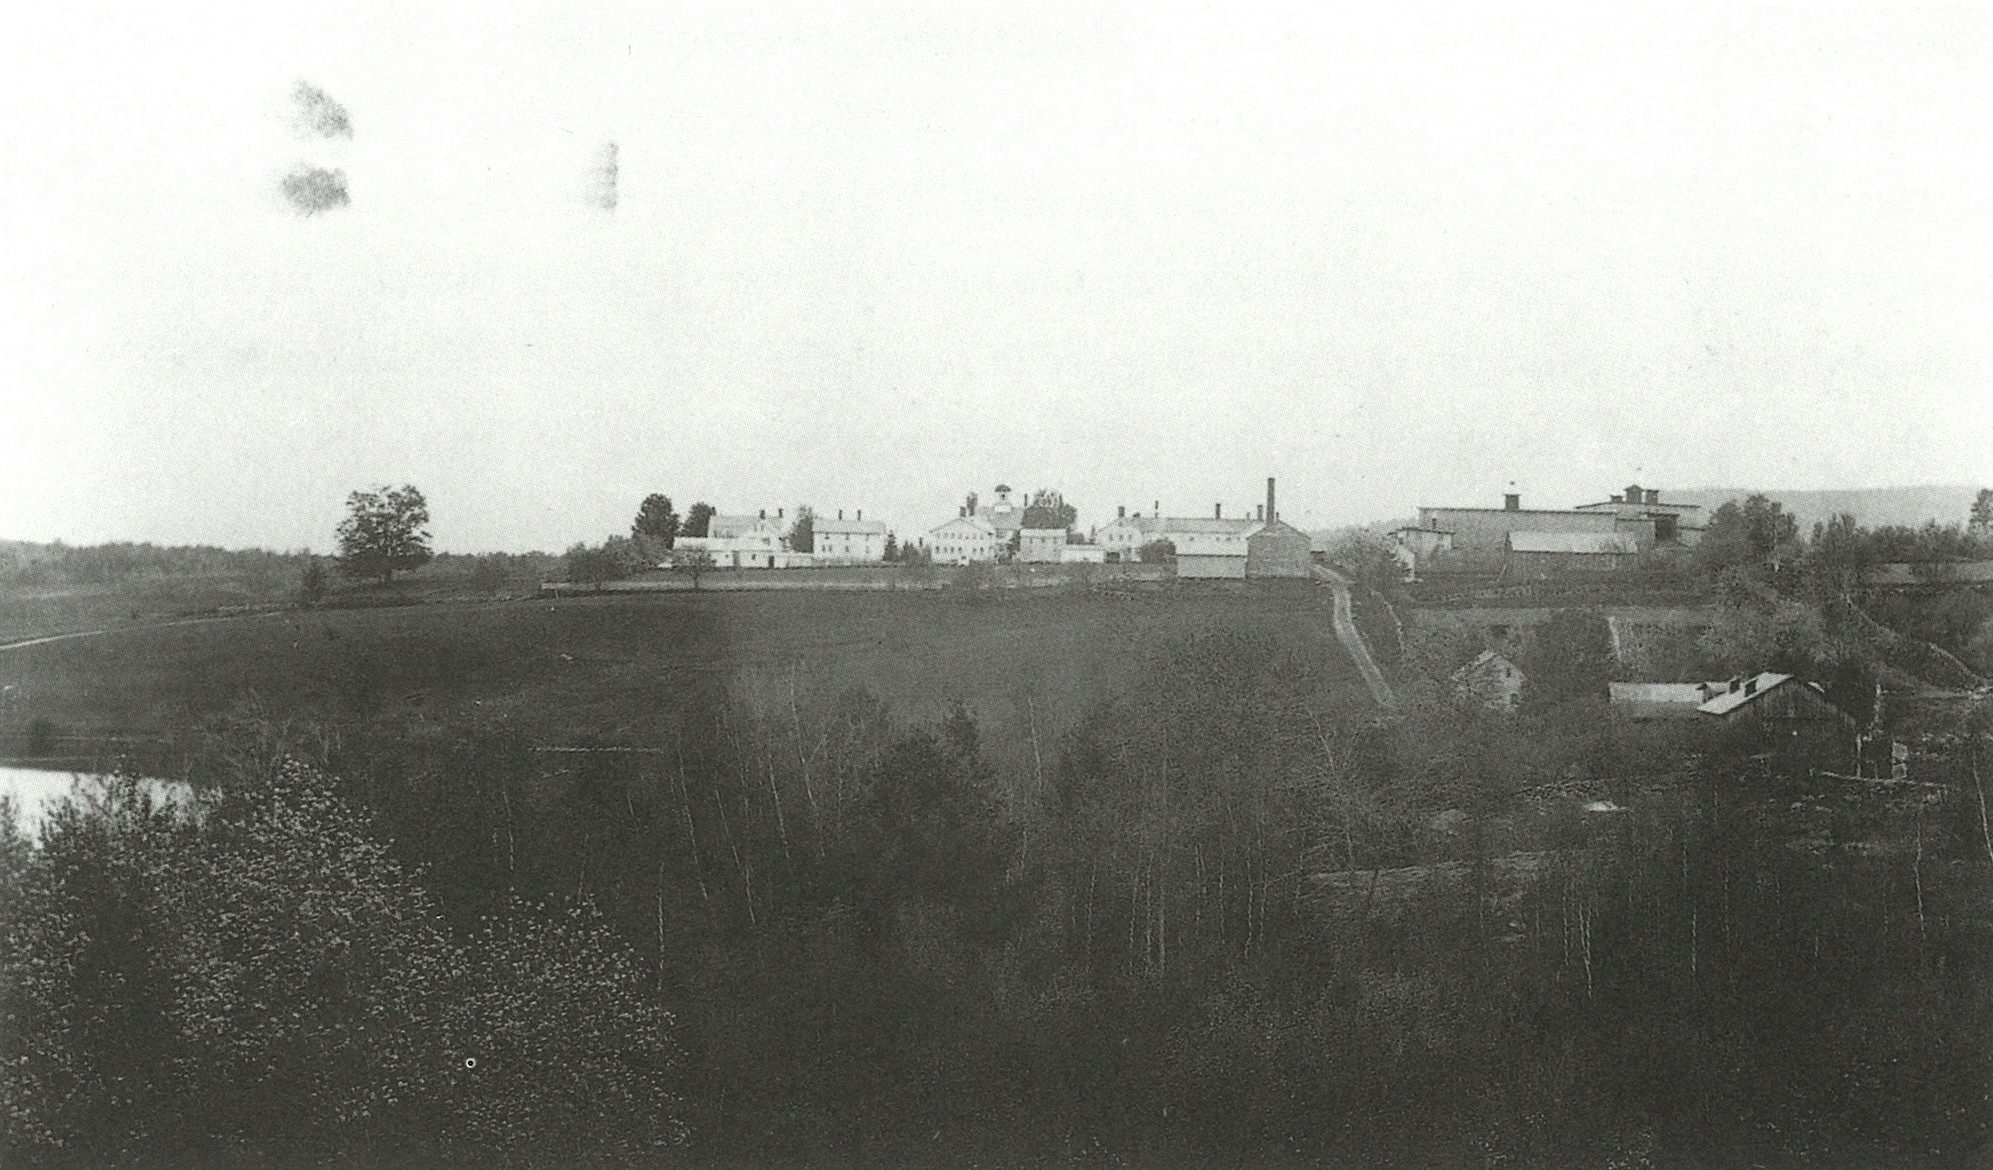 View of the Church Family area from Union Hill, Canterbury Shaker Village, CT, c. 1870